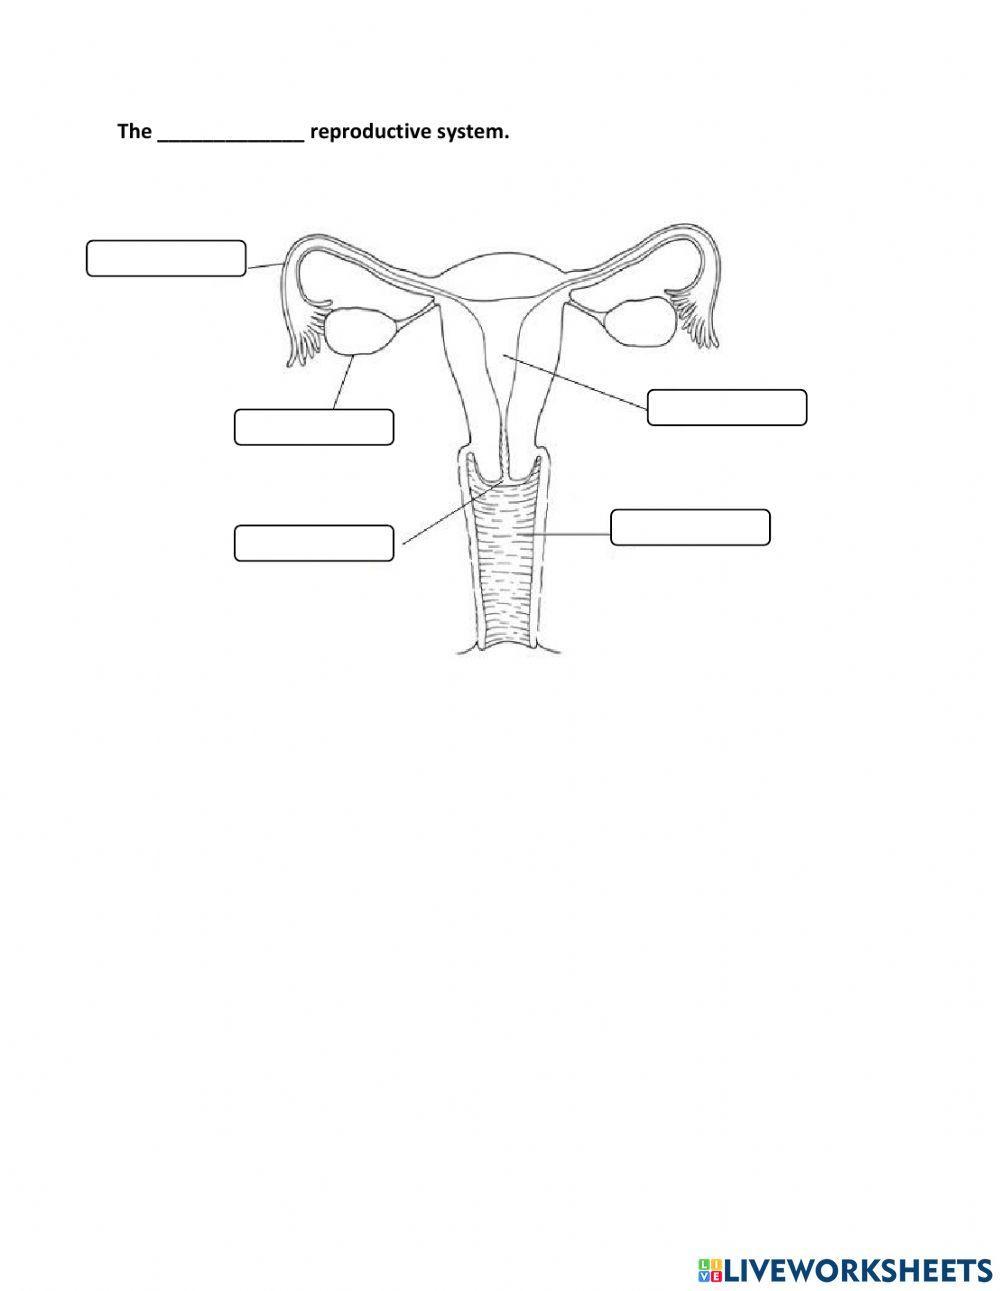 Labelling the Human Reproductive System